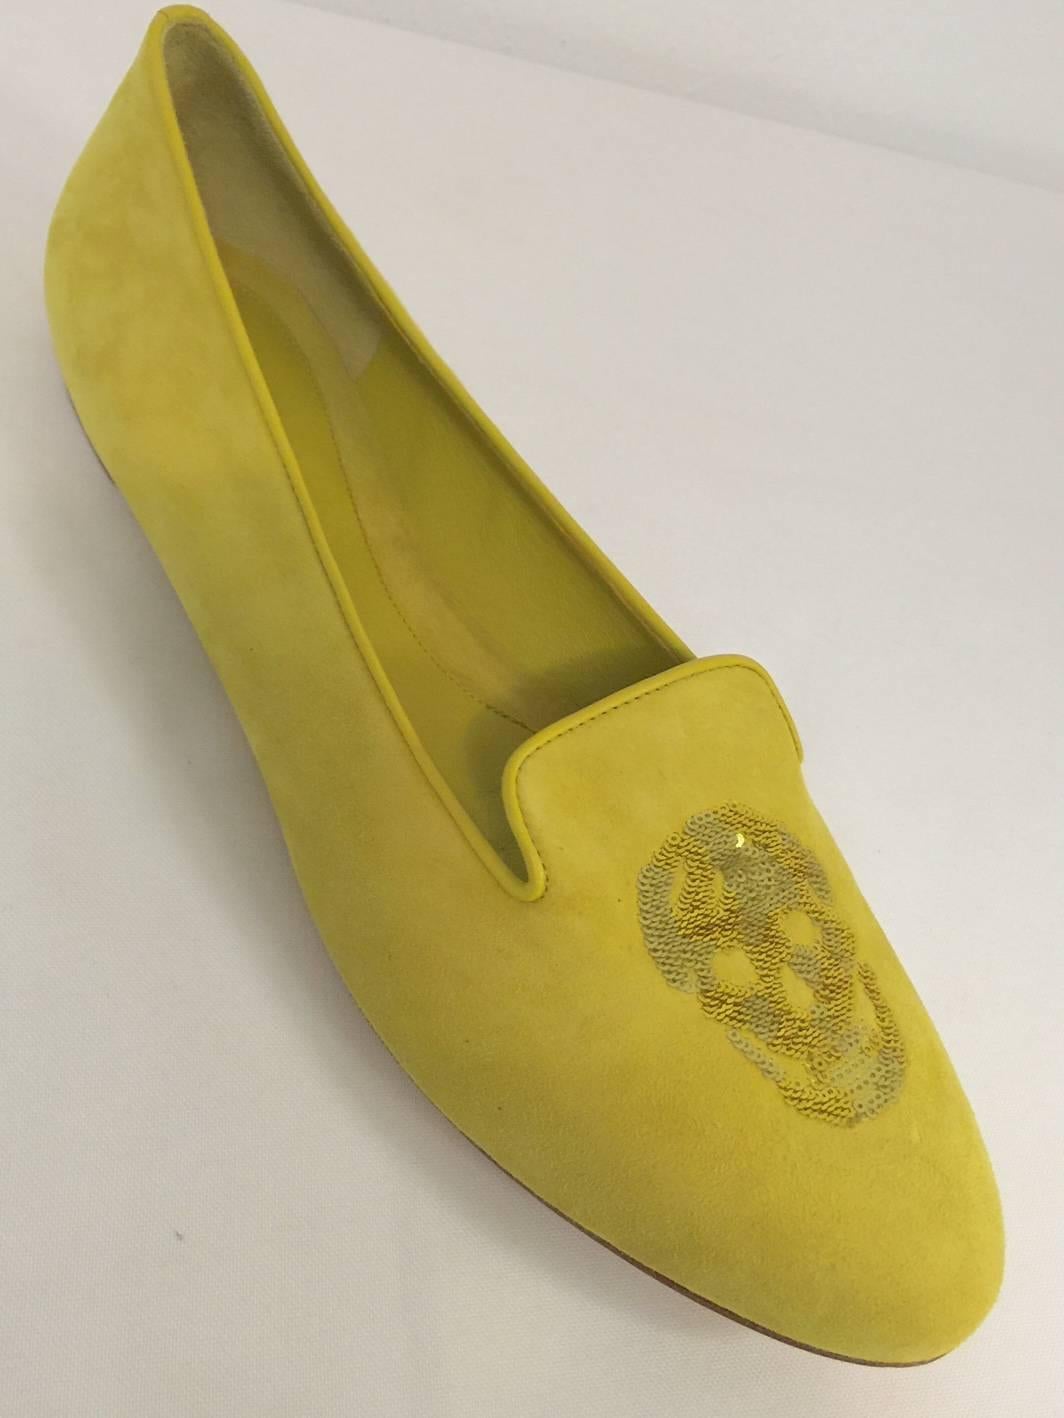 These new Alexander McQueen Spanish Olive Suede Slippers are not your typical suede slippers!  Featuring sequined skull embroidery on the vamps, these titillate and create a buzz with little effort.   Leather sole, insole and lining.  NEVER Worn! 